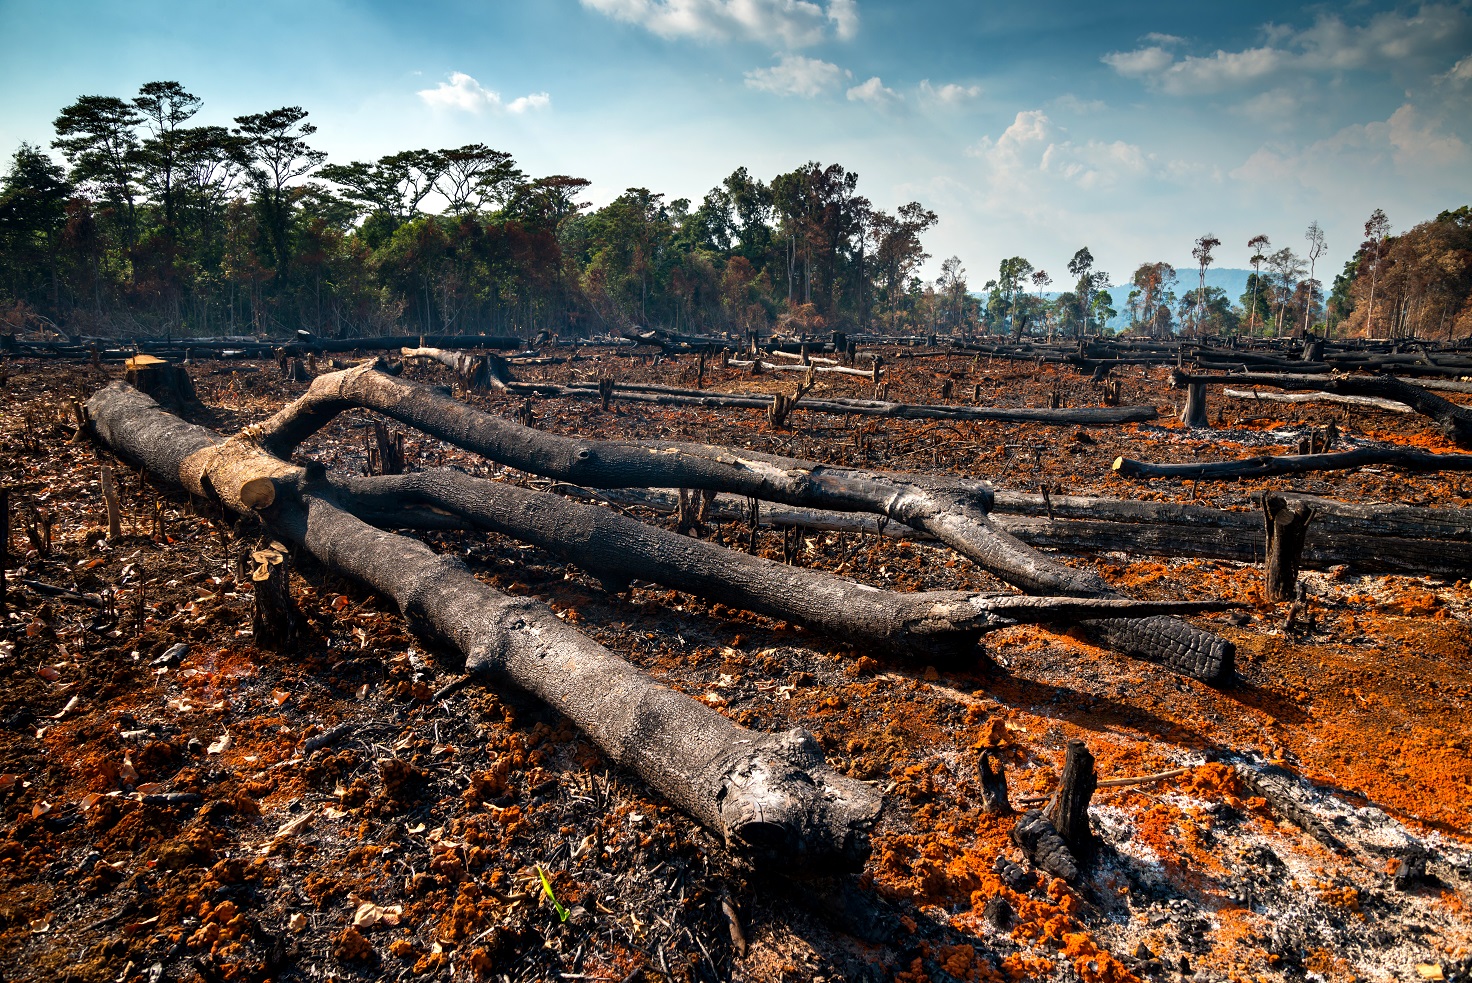 Wood,Cutting,,Burning,Wood,,Destroying,The,Environment.area,Of,Illegal,Deforestation